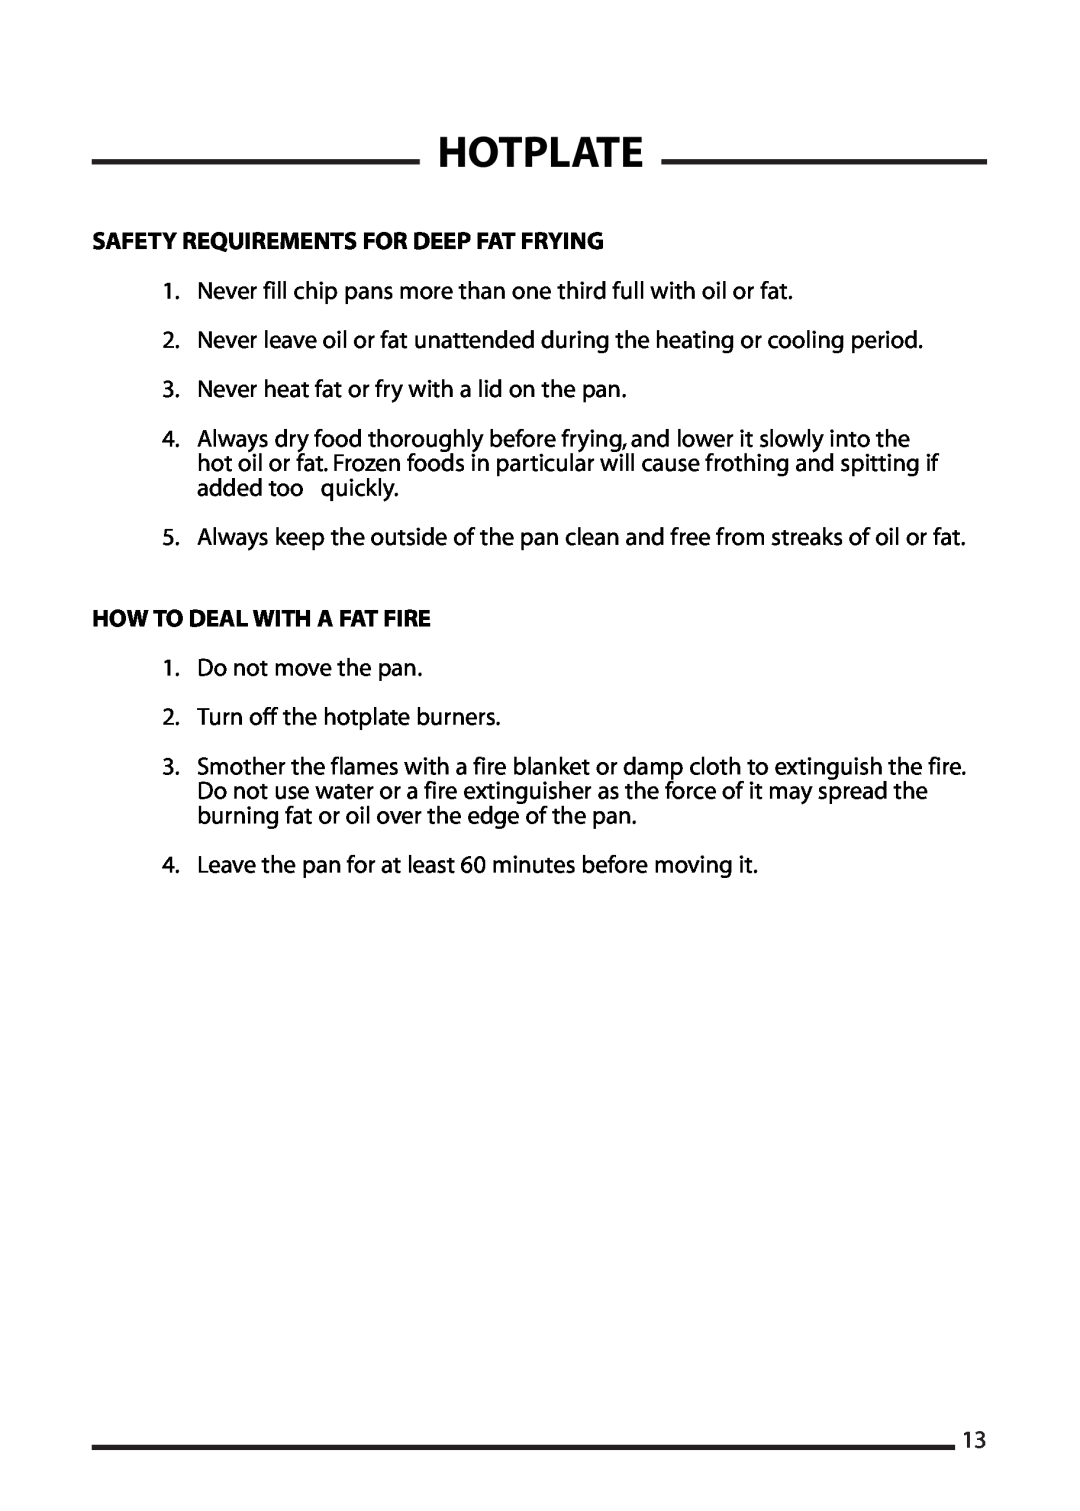 Cannon 4466200024-01 Safety Requirements For Deep Fat Frying, How To Deal With A Fat Fire, Hotplate 